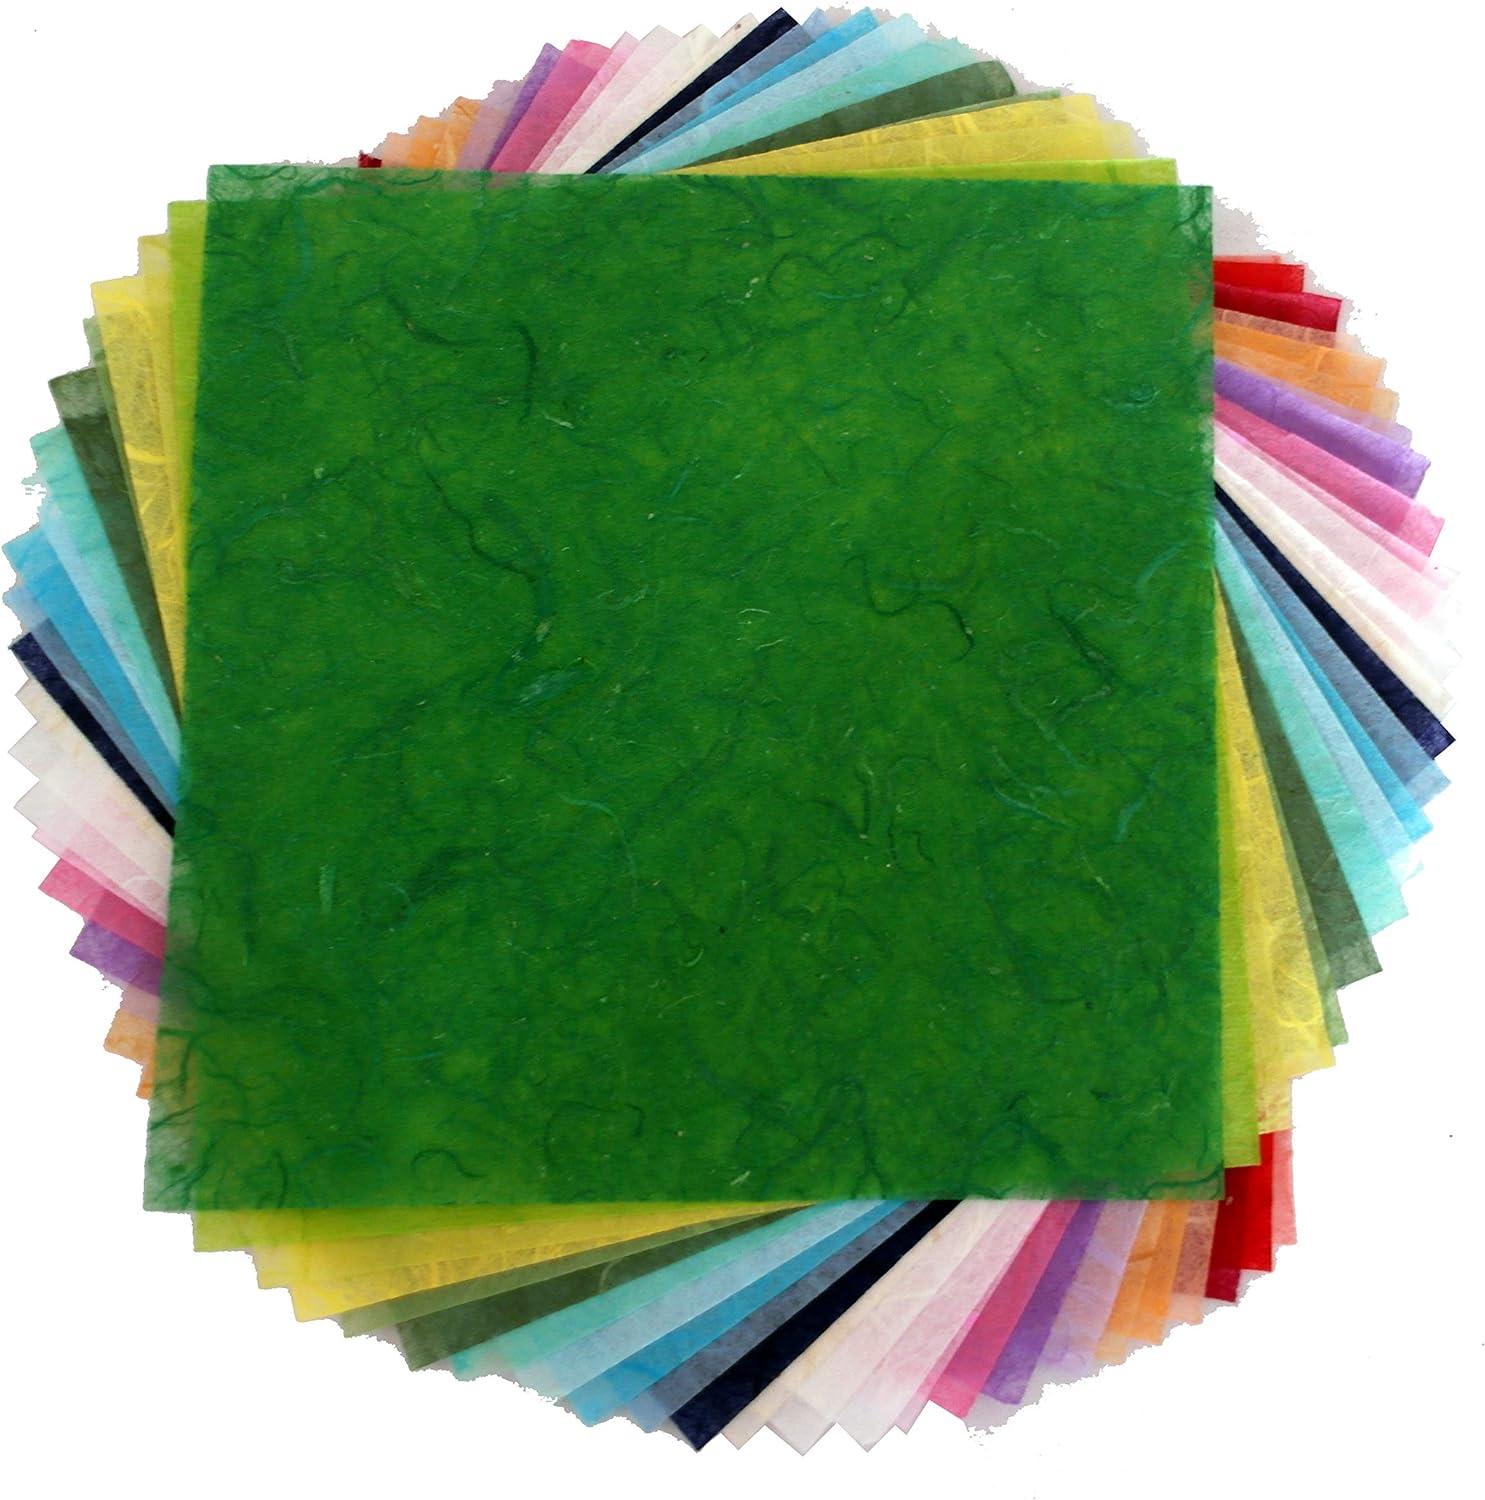 Mulberry Paper 20 Sheets 6 x 6 Inches Square Origami Paper Arts Folding  Craft, Decoration Paper, Square Folding Paper for DIY Crafts. (Banana Bark)